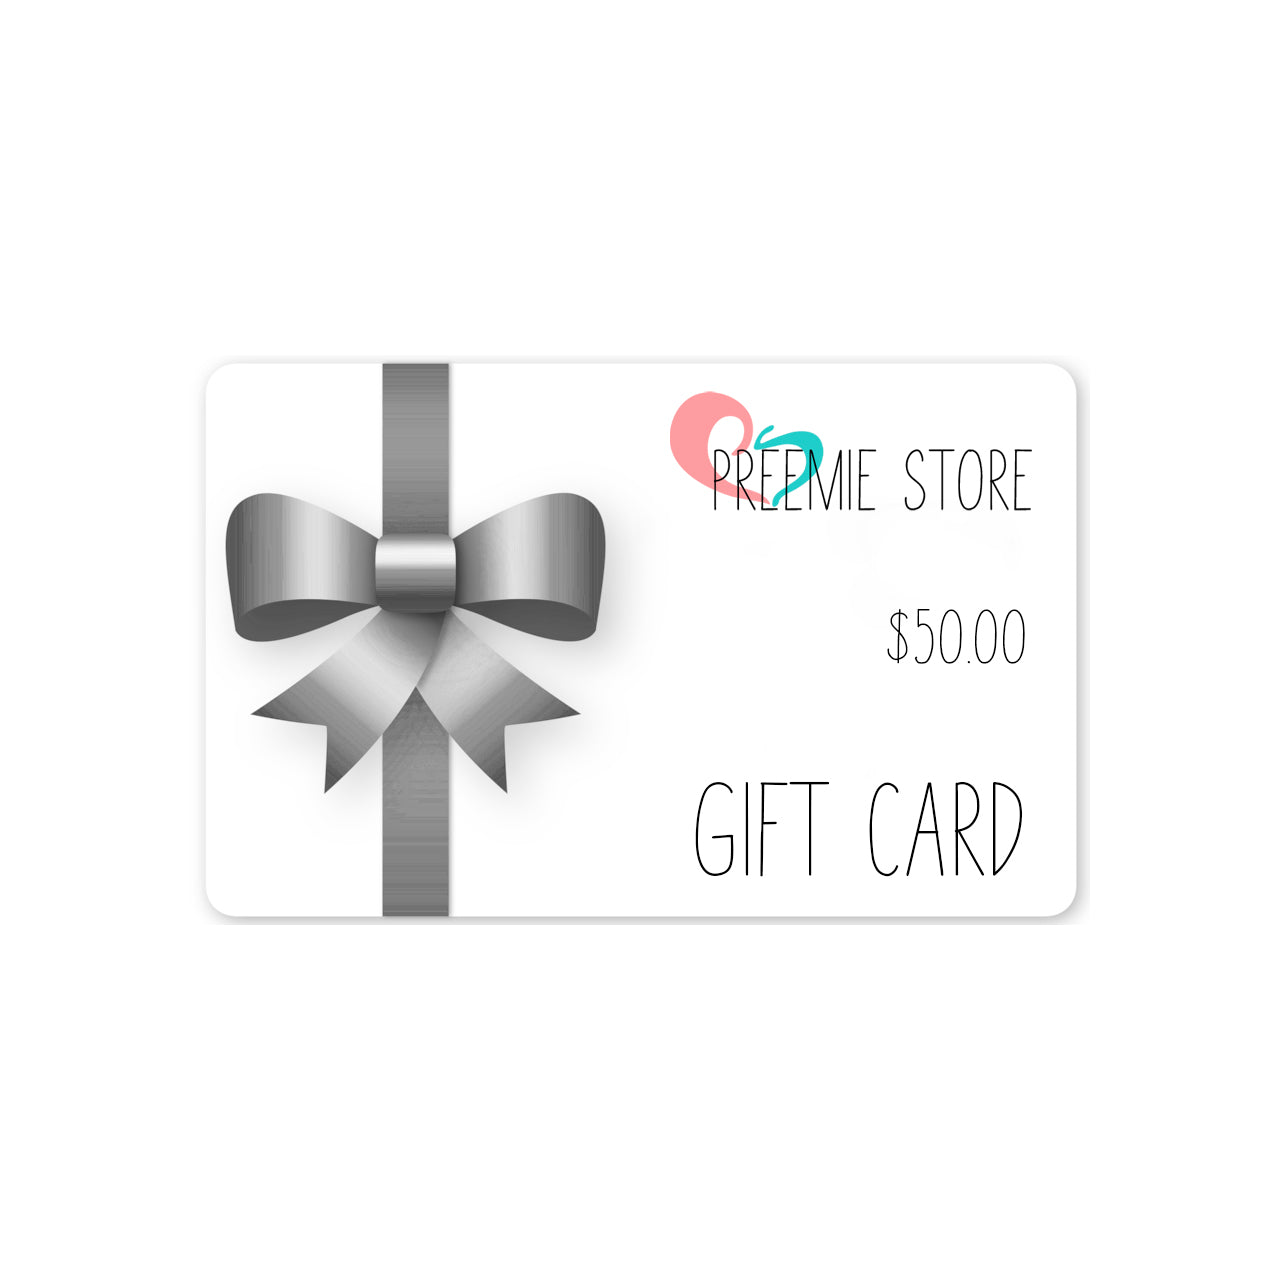 The best way to buy gift cards ever - CyberGuy